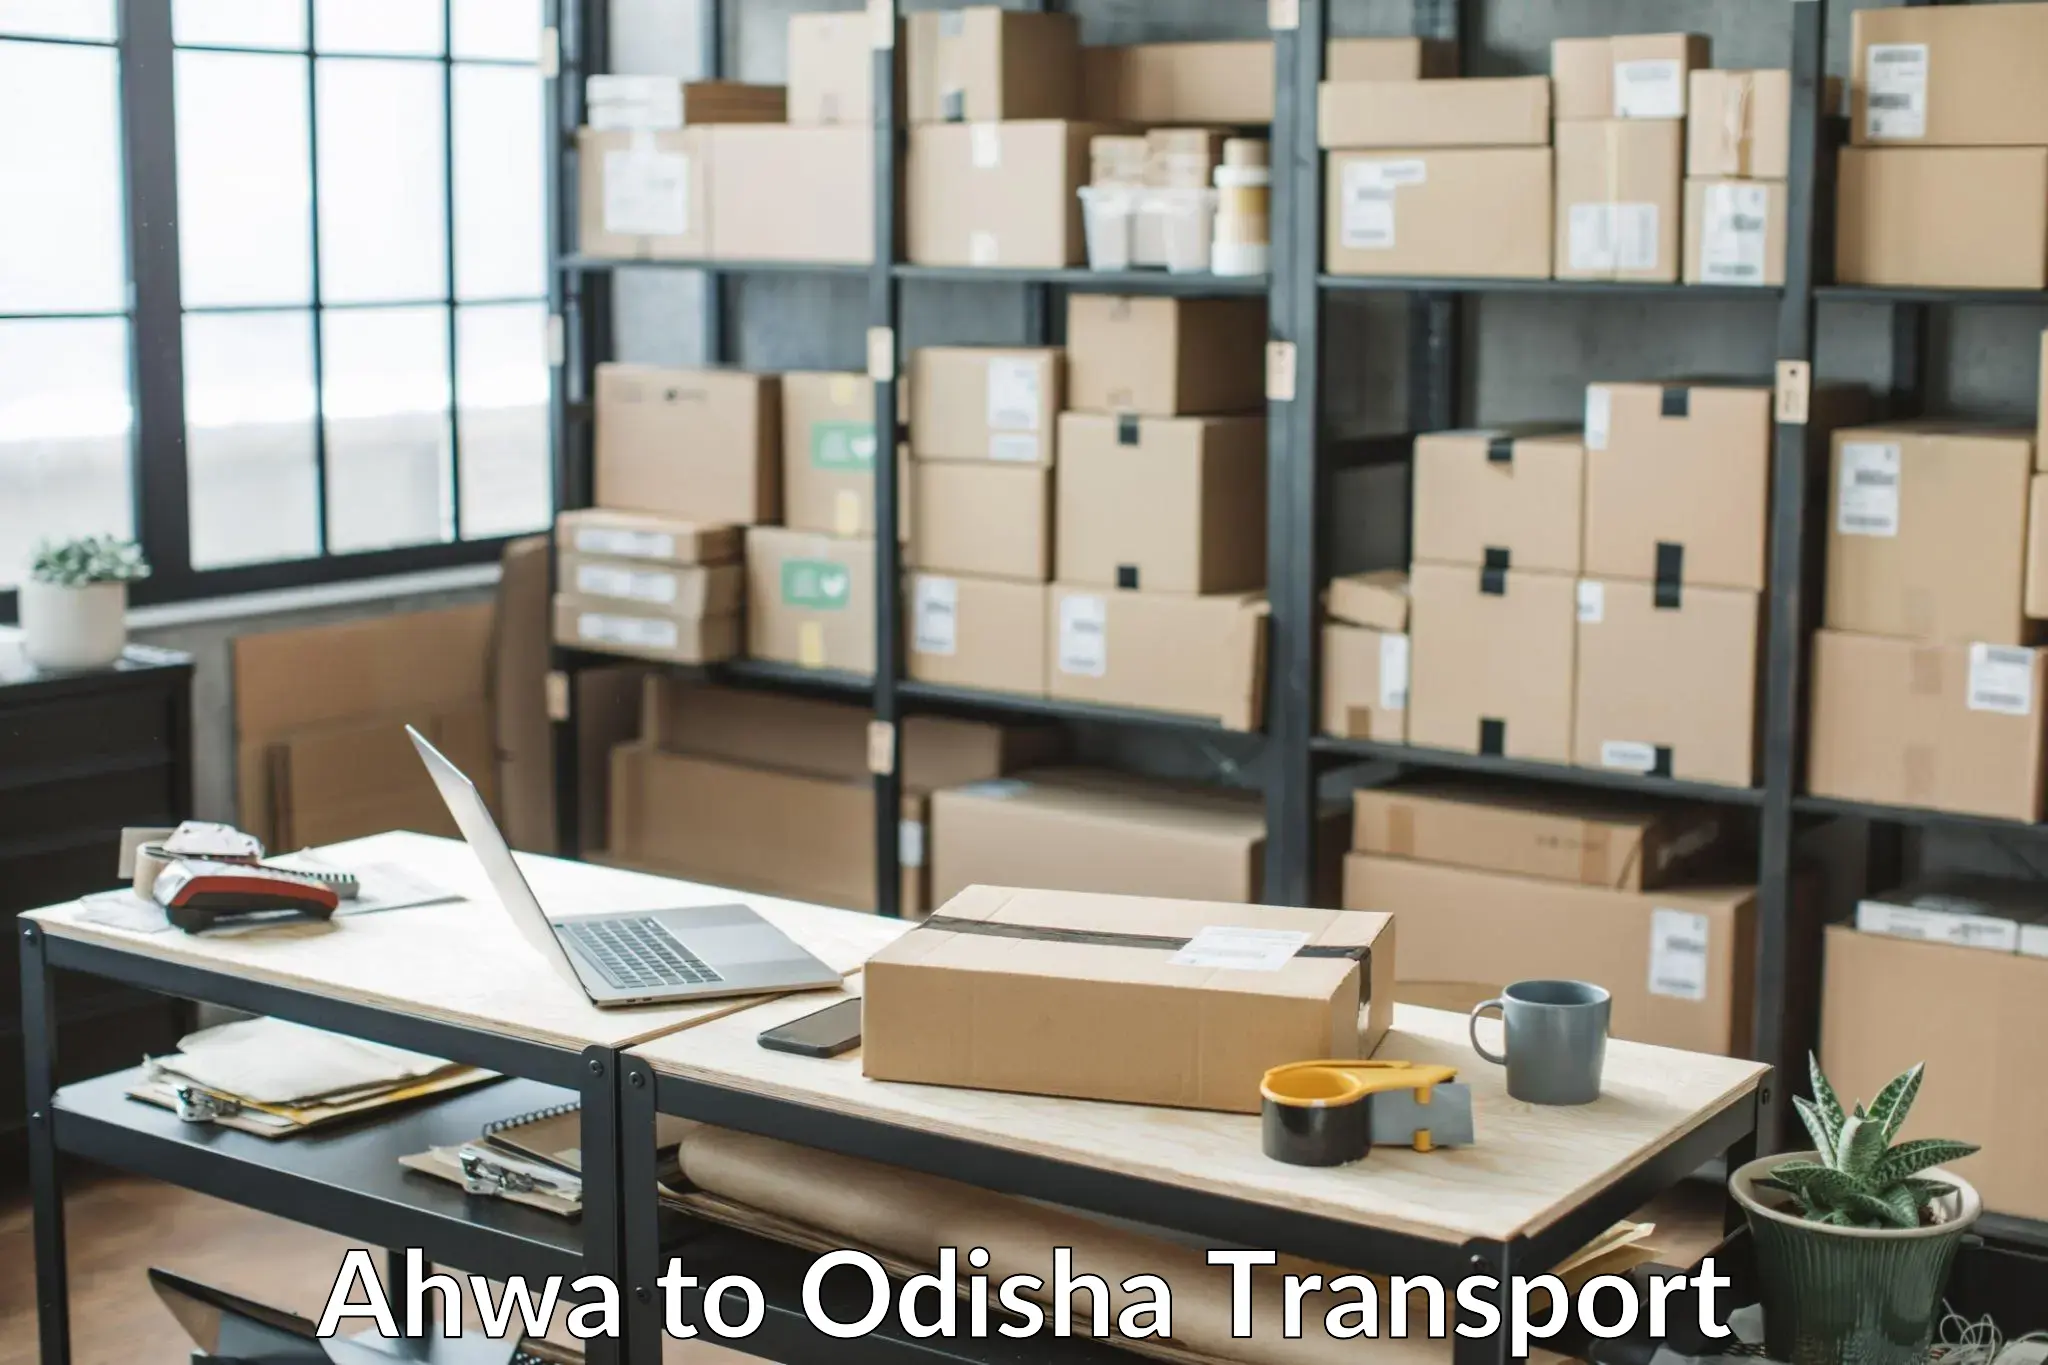 Truck transport companies in India in Ahwa to Dandisahi